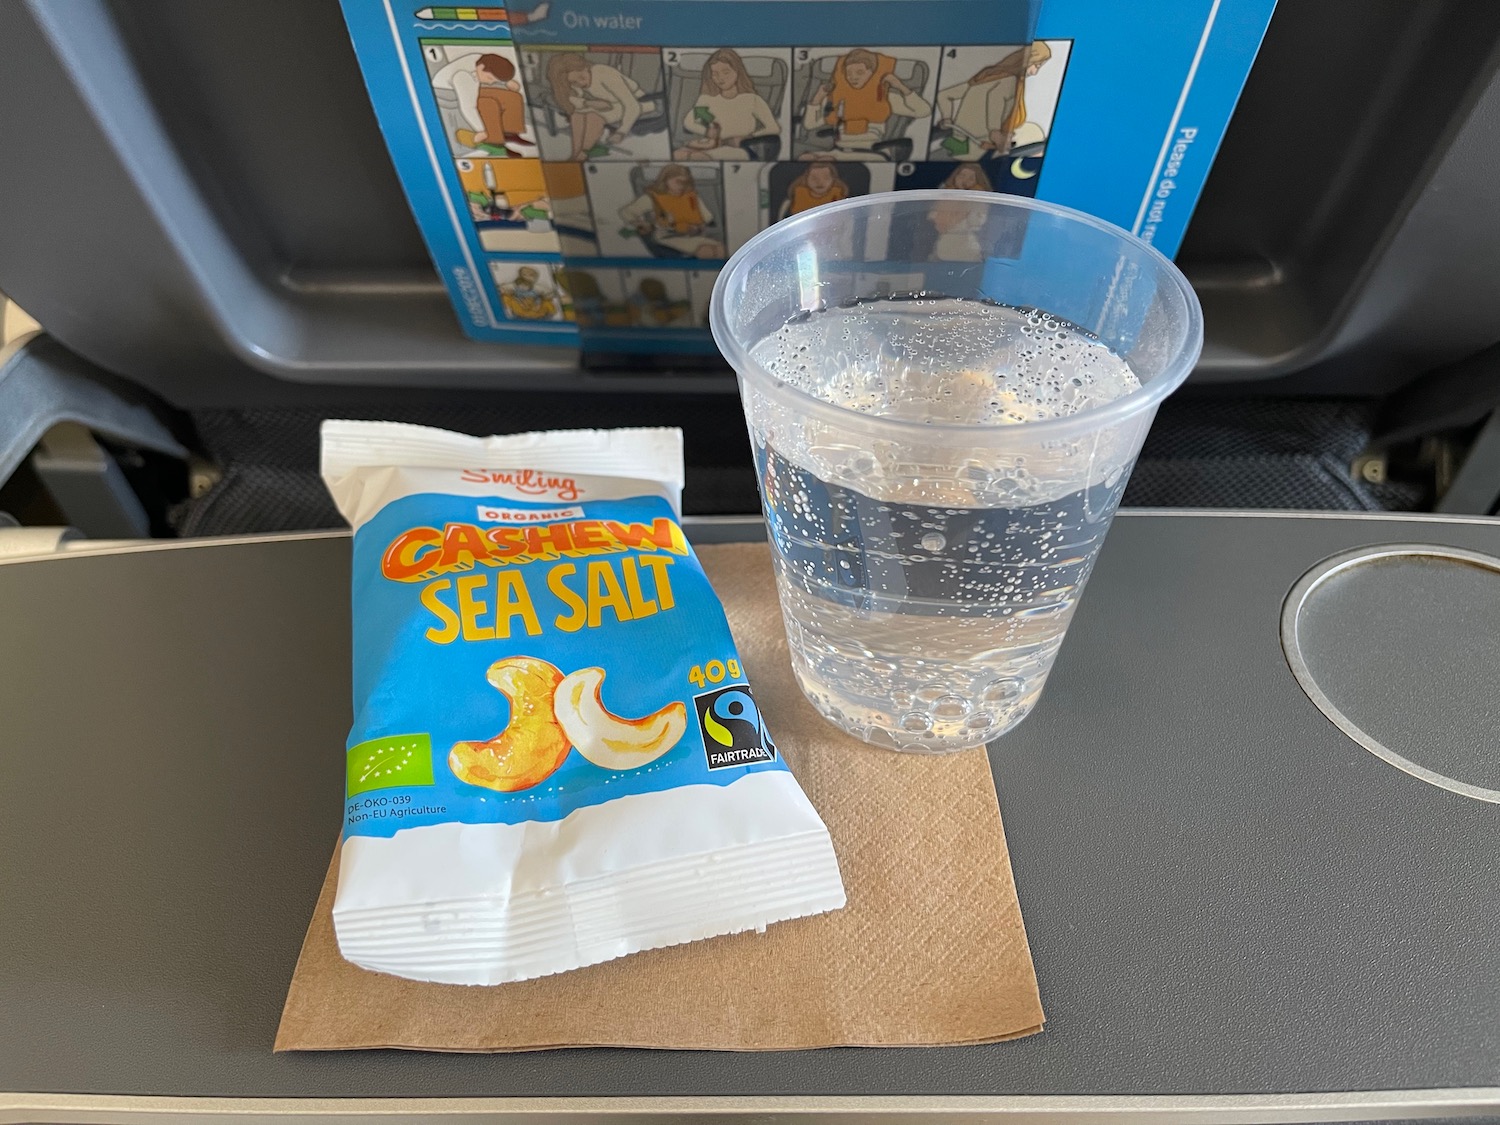 a plastic cup of water and a package of salt